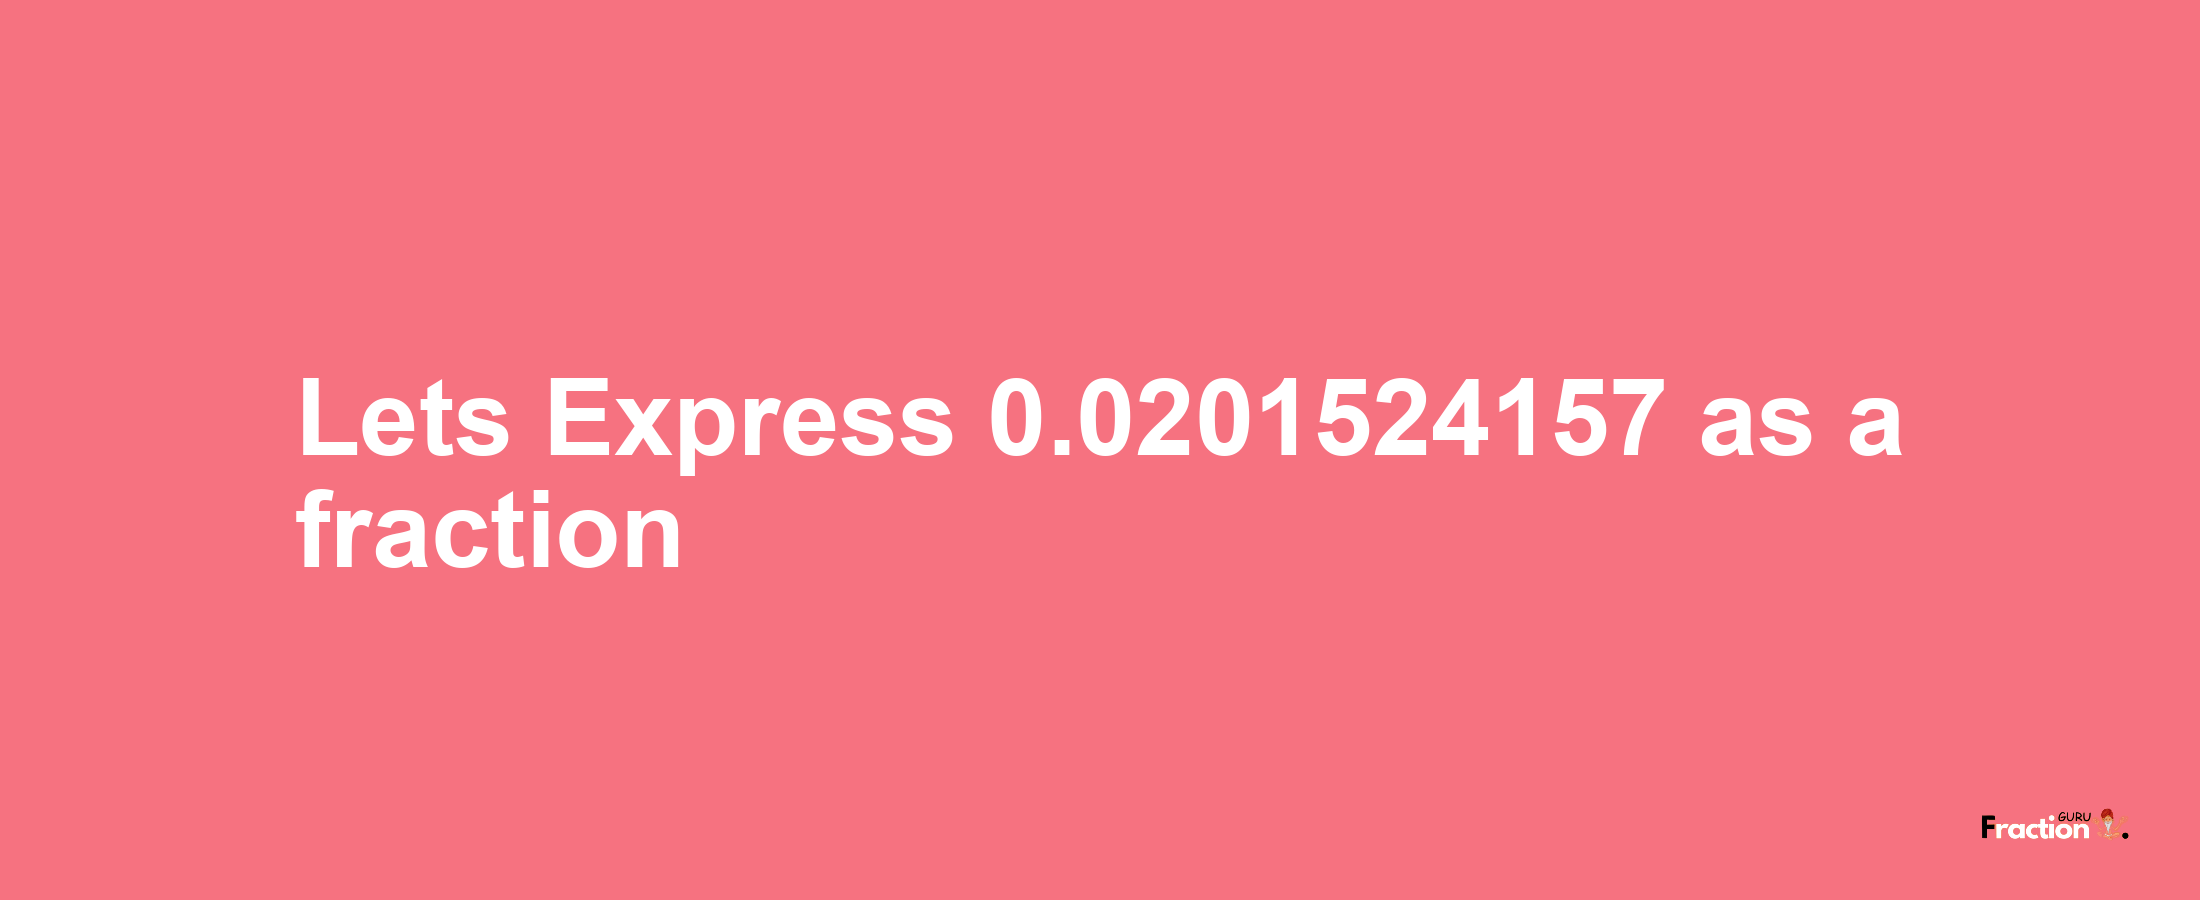 Lets Express 0.0201524157 as afraction